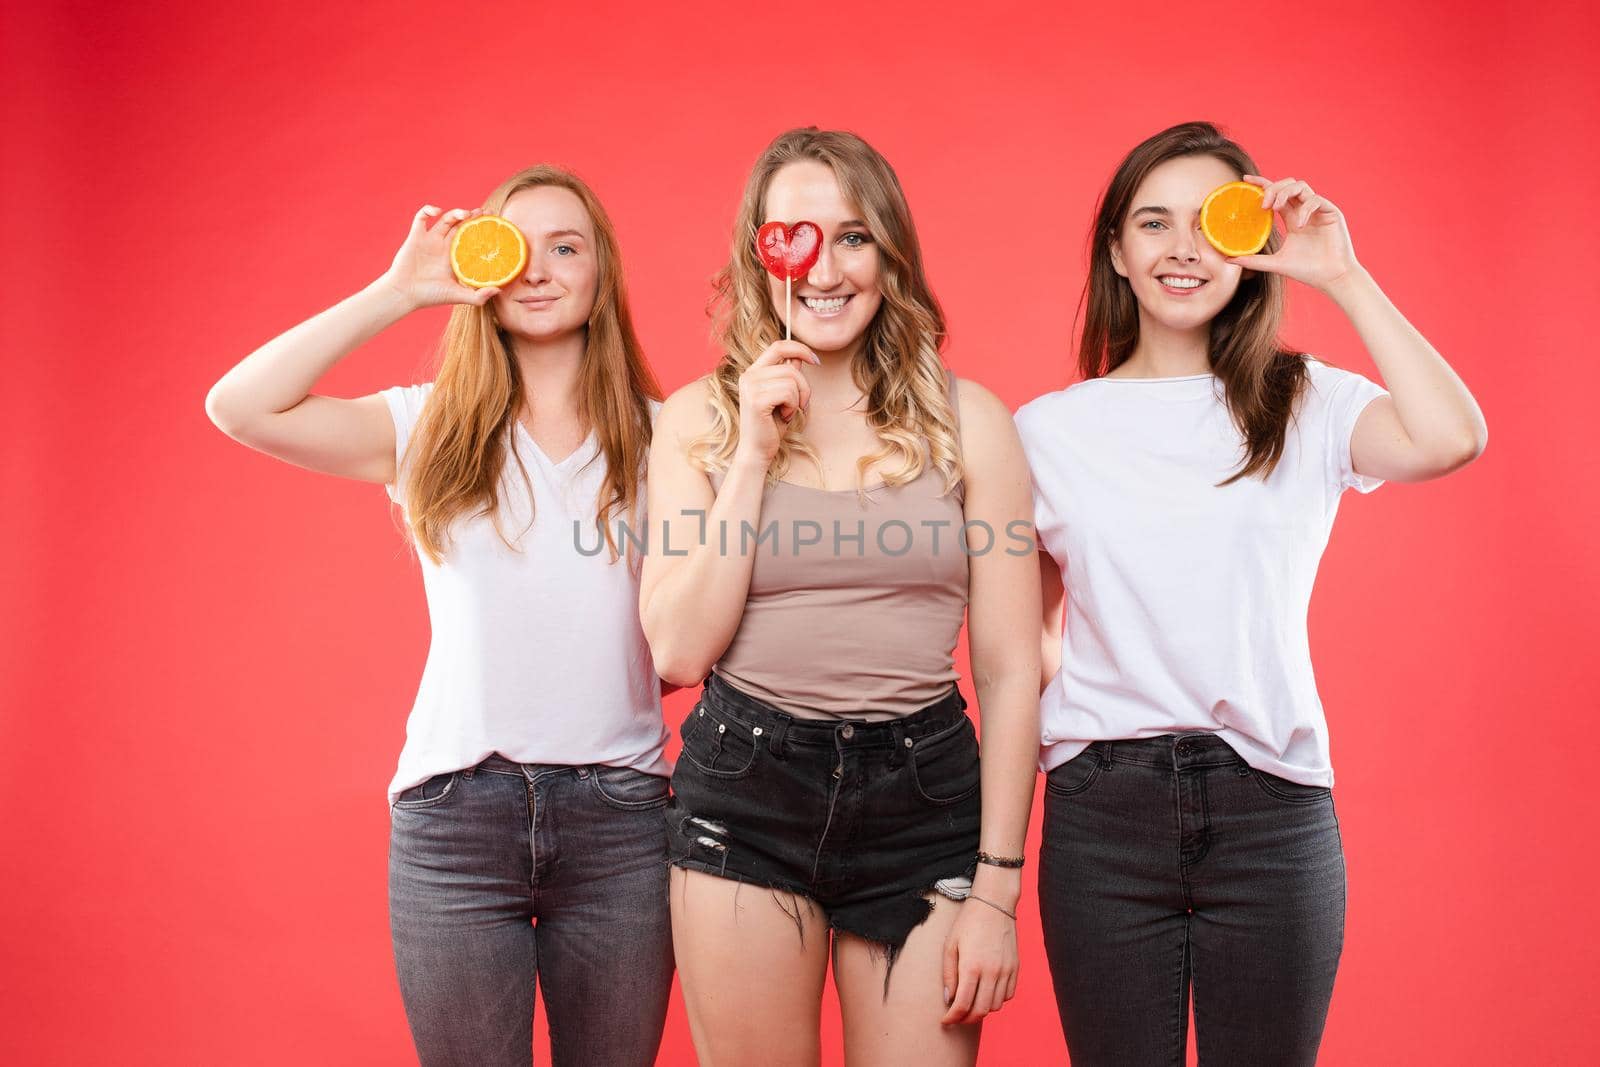 Studio portrait of three cheerful pretty girlfriends holding halved oranges and one red heart-shaped lollipop. Isolate on red. Looking at camera and smile. Summer concept.